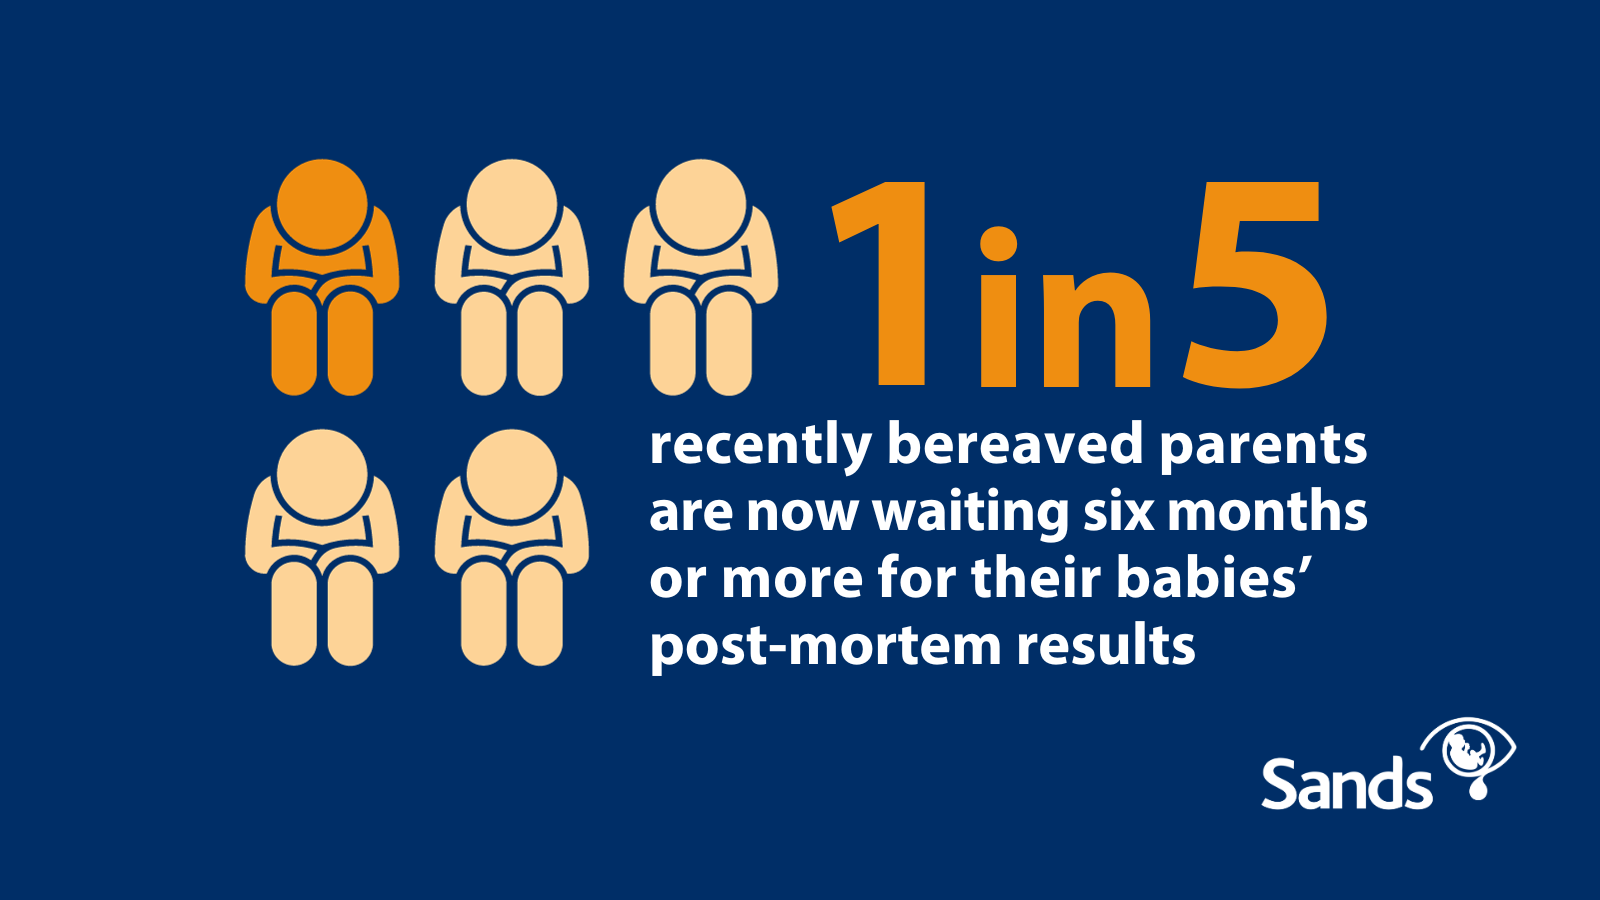 Image with text 1 in 5 recently bereaved parents are now waiting six months or more for their babies' post-mortem results